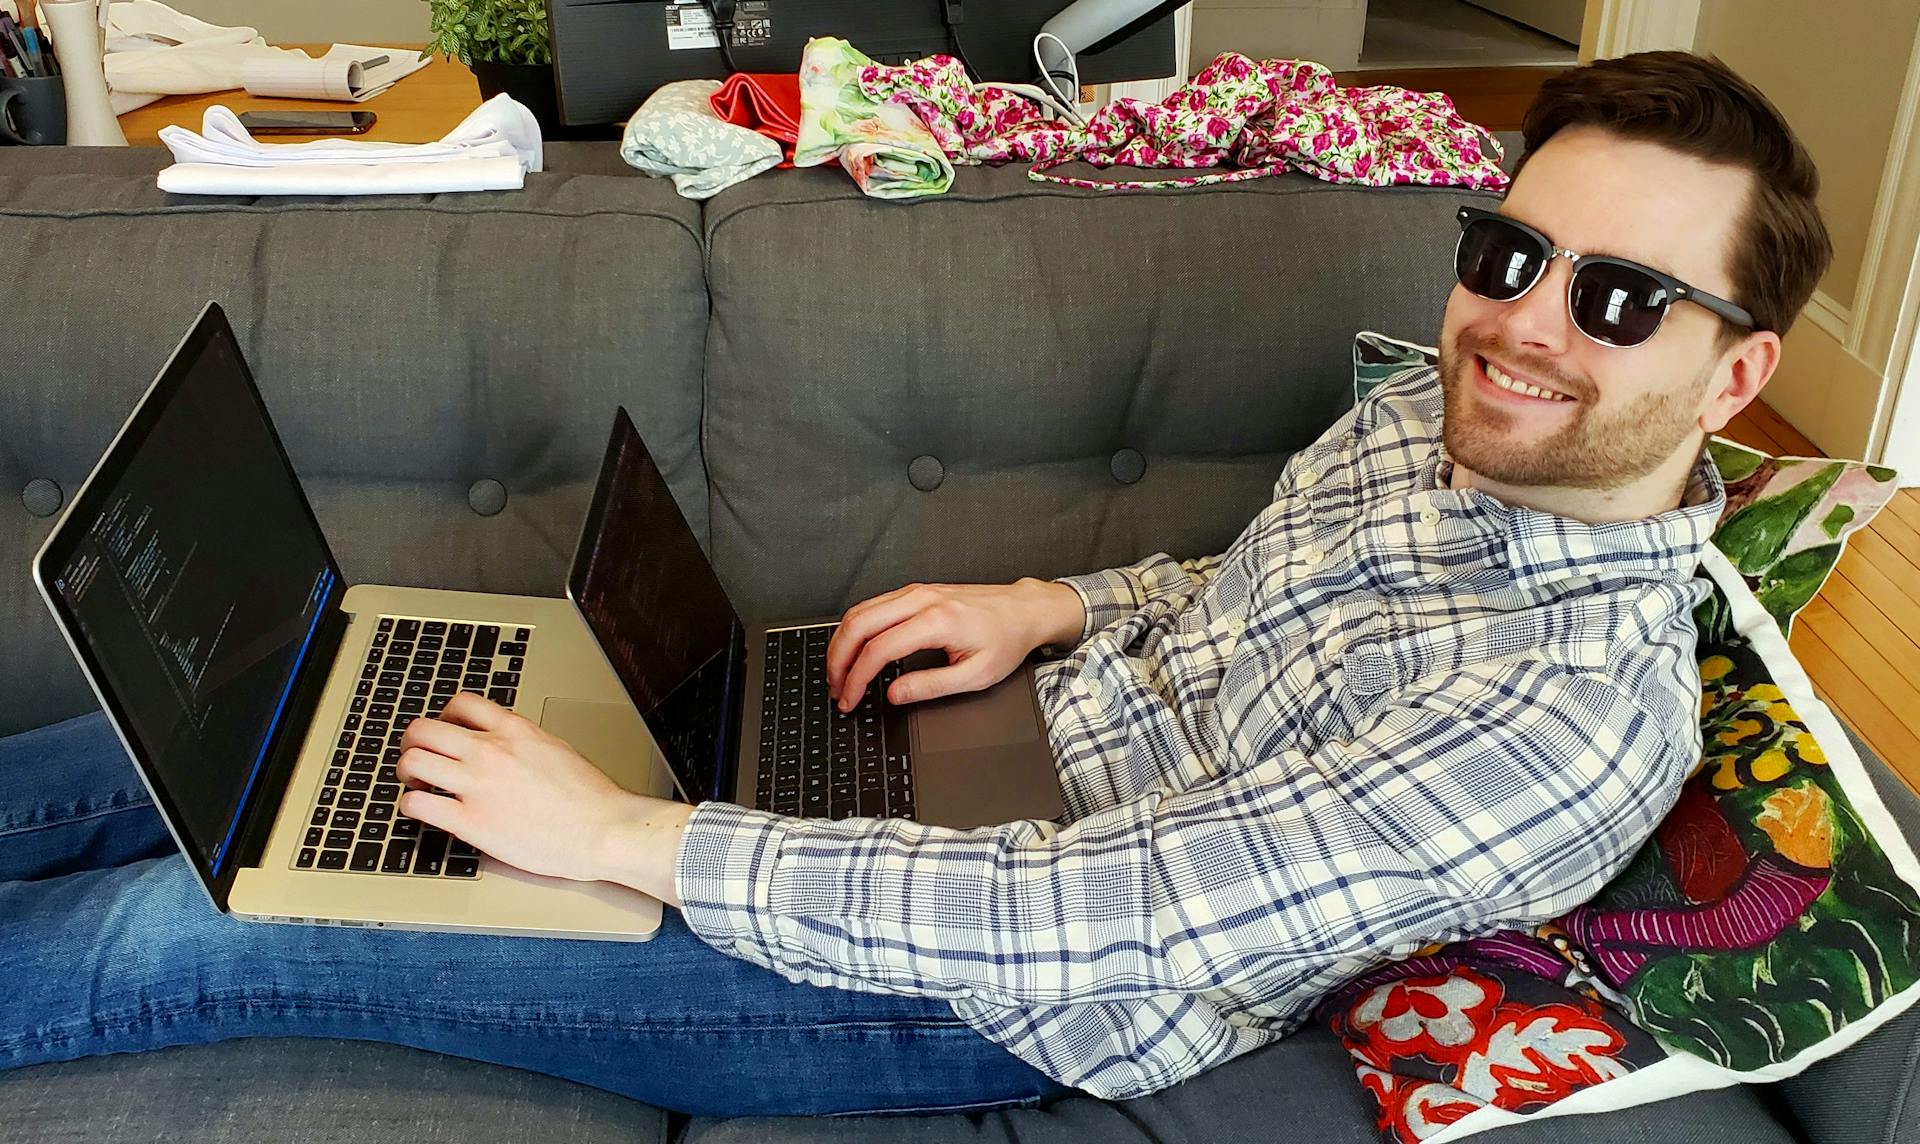 Andrew lying on a couch wearing sunglasses, somehow typing on two laptops simultaneously, smiling at the camera